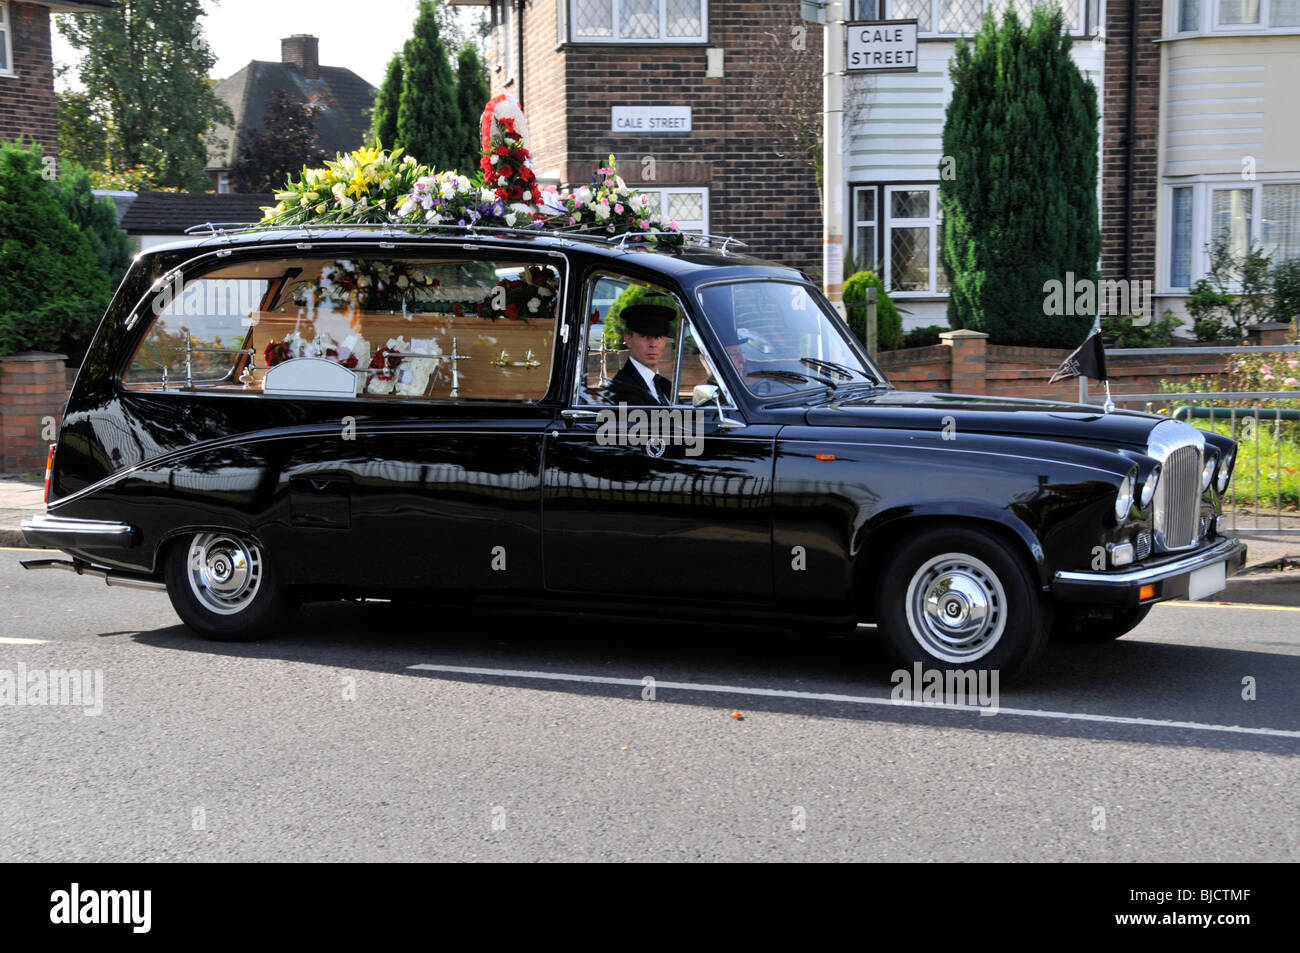 Funeral hearse undertaker car driving along residential street (street name and other text digitally changed) East London England UK Stock Photo